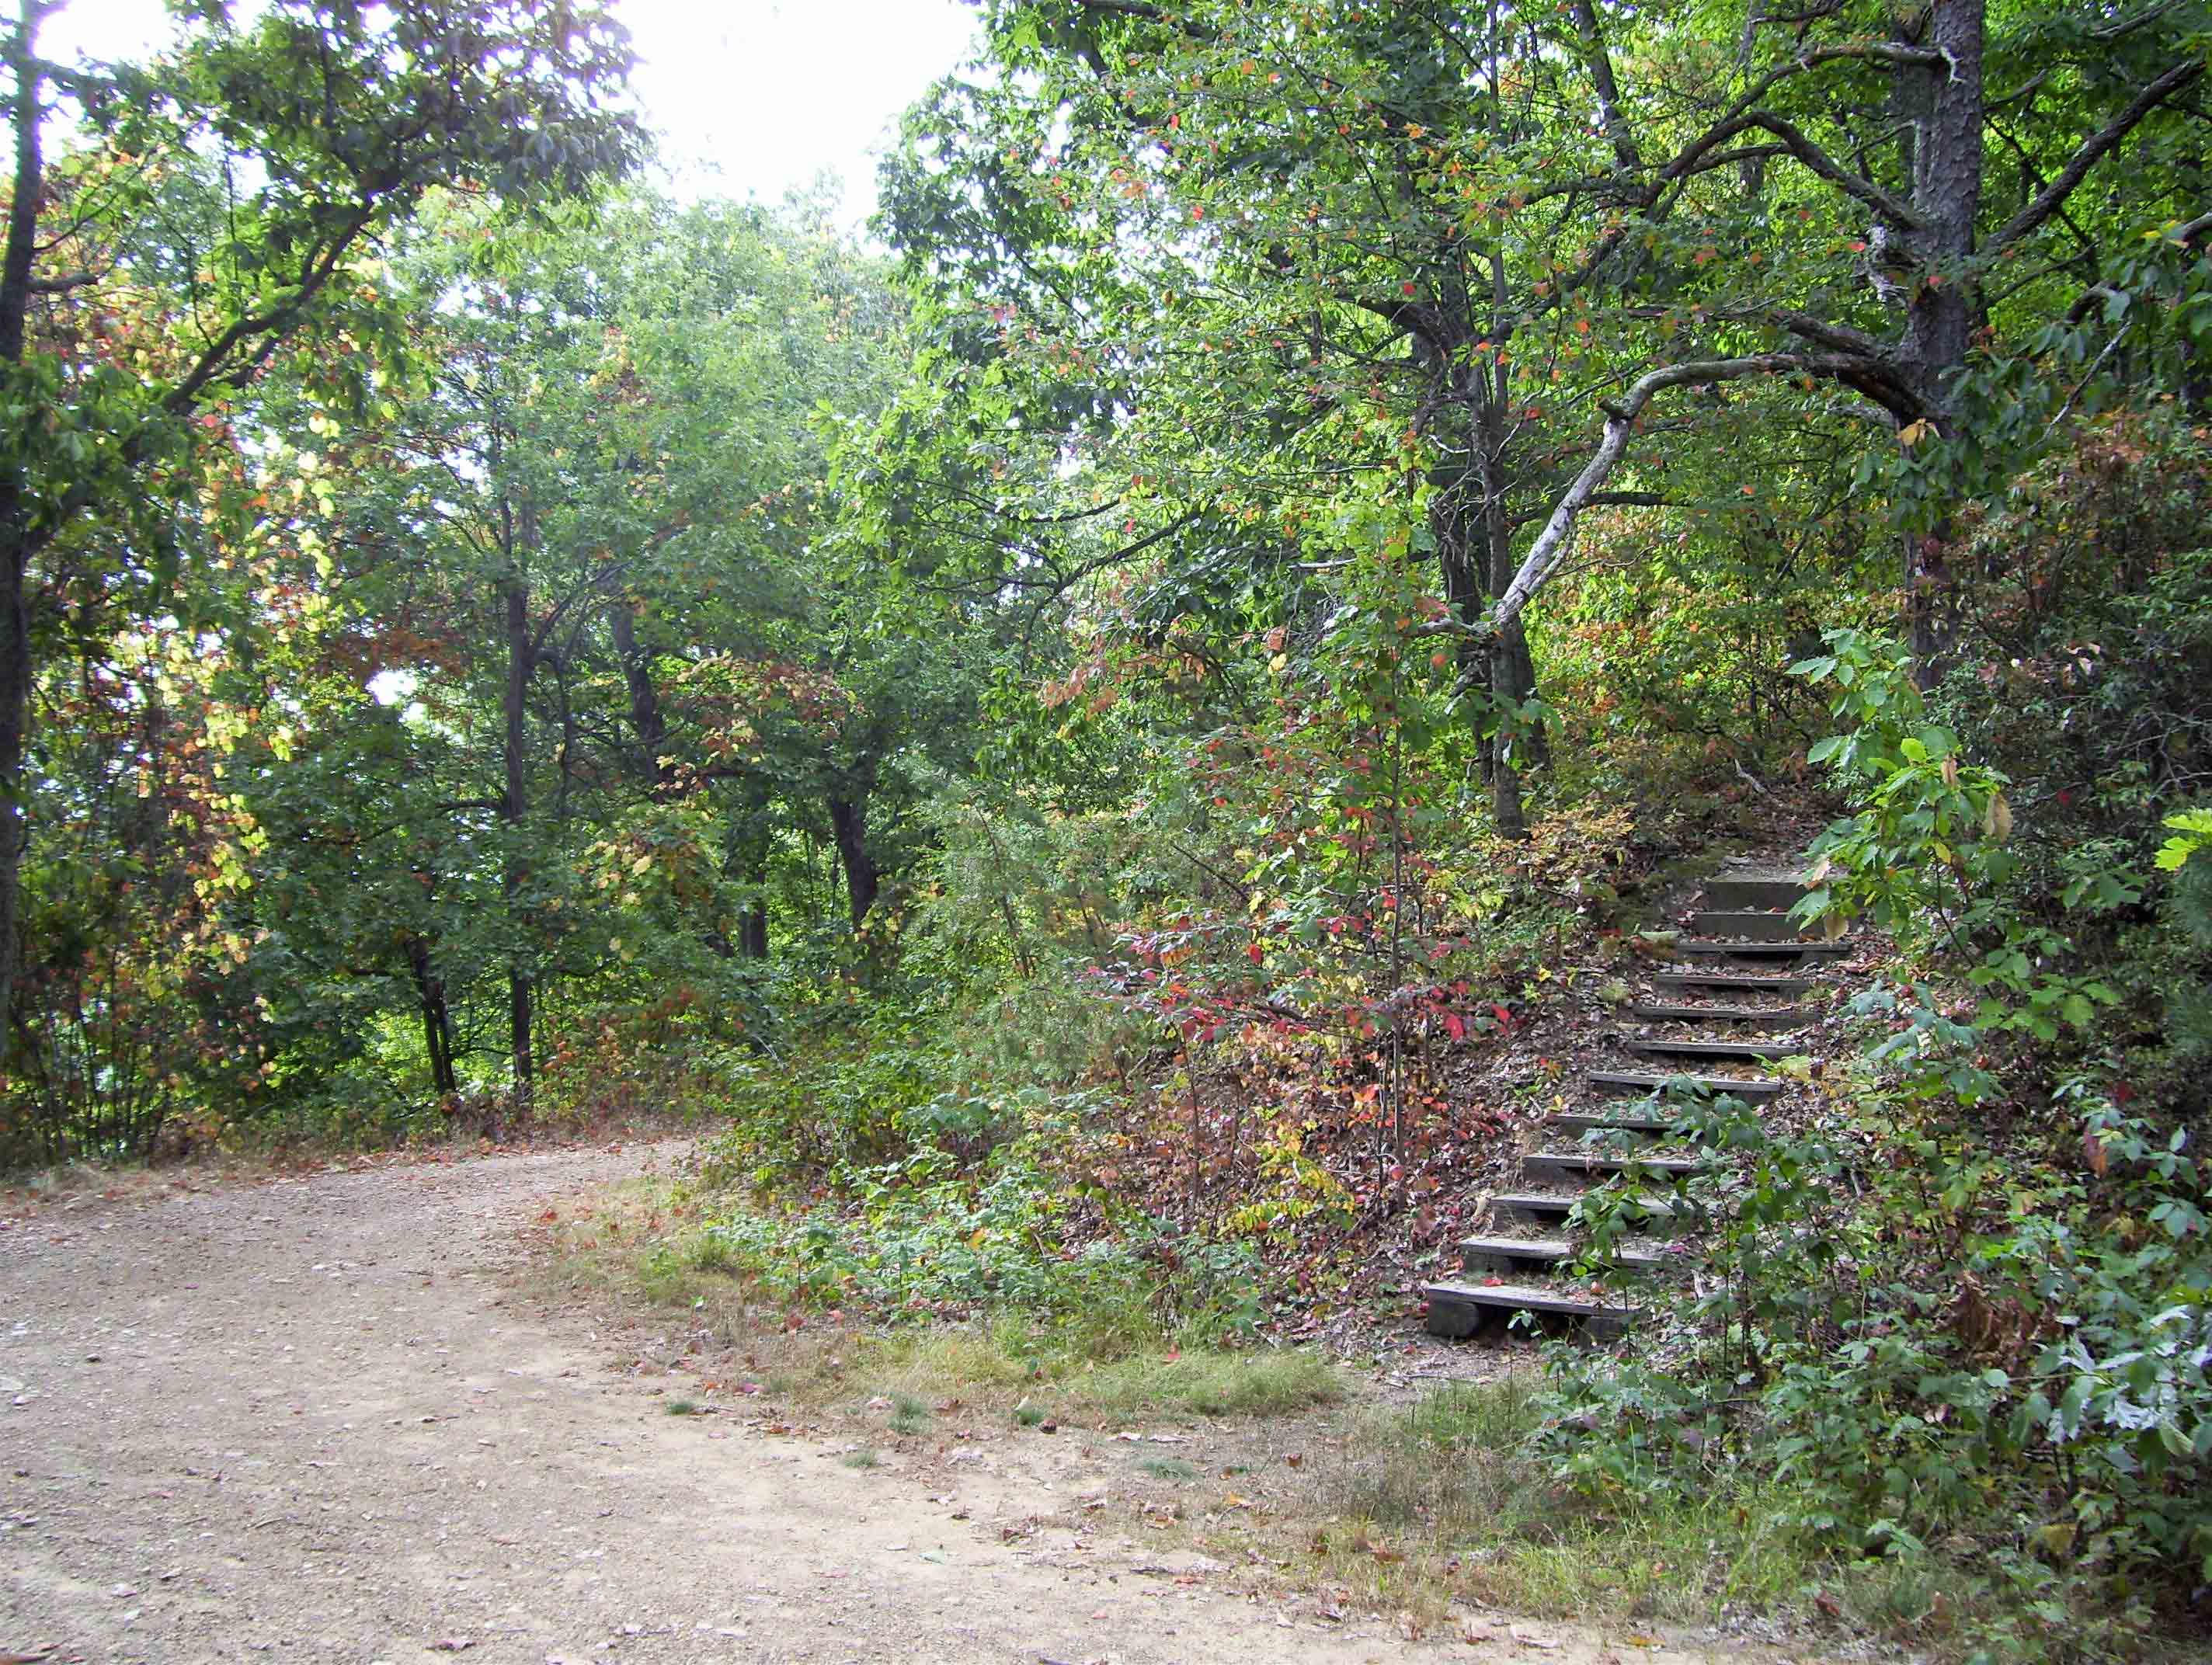 AT crossing of Salt Pond Road (mile 5.8). The southbound AT ascends the stairs on the right. The road ahead leads 1.1 miles to Curry Gap on the Blue Ridge Parkway. Salt Pond Road is gated there to prevent vehicle access from the Parkway. Any possible parking here is just to the left of this picture.  Courtesy dlcul@conncoll.edu